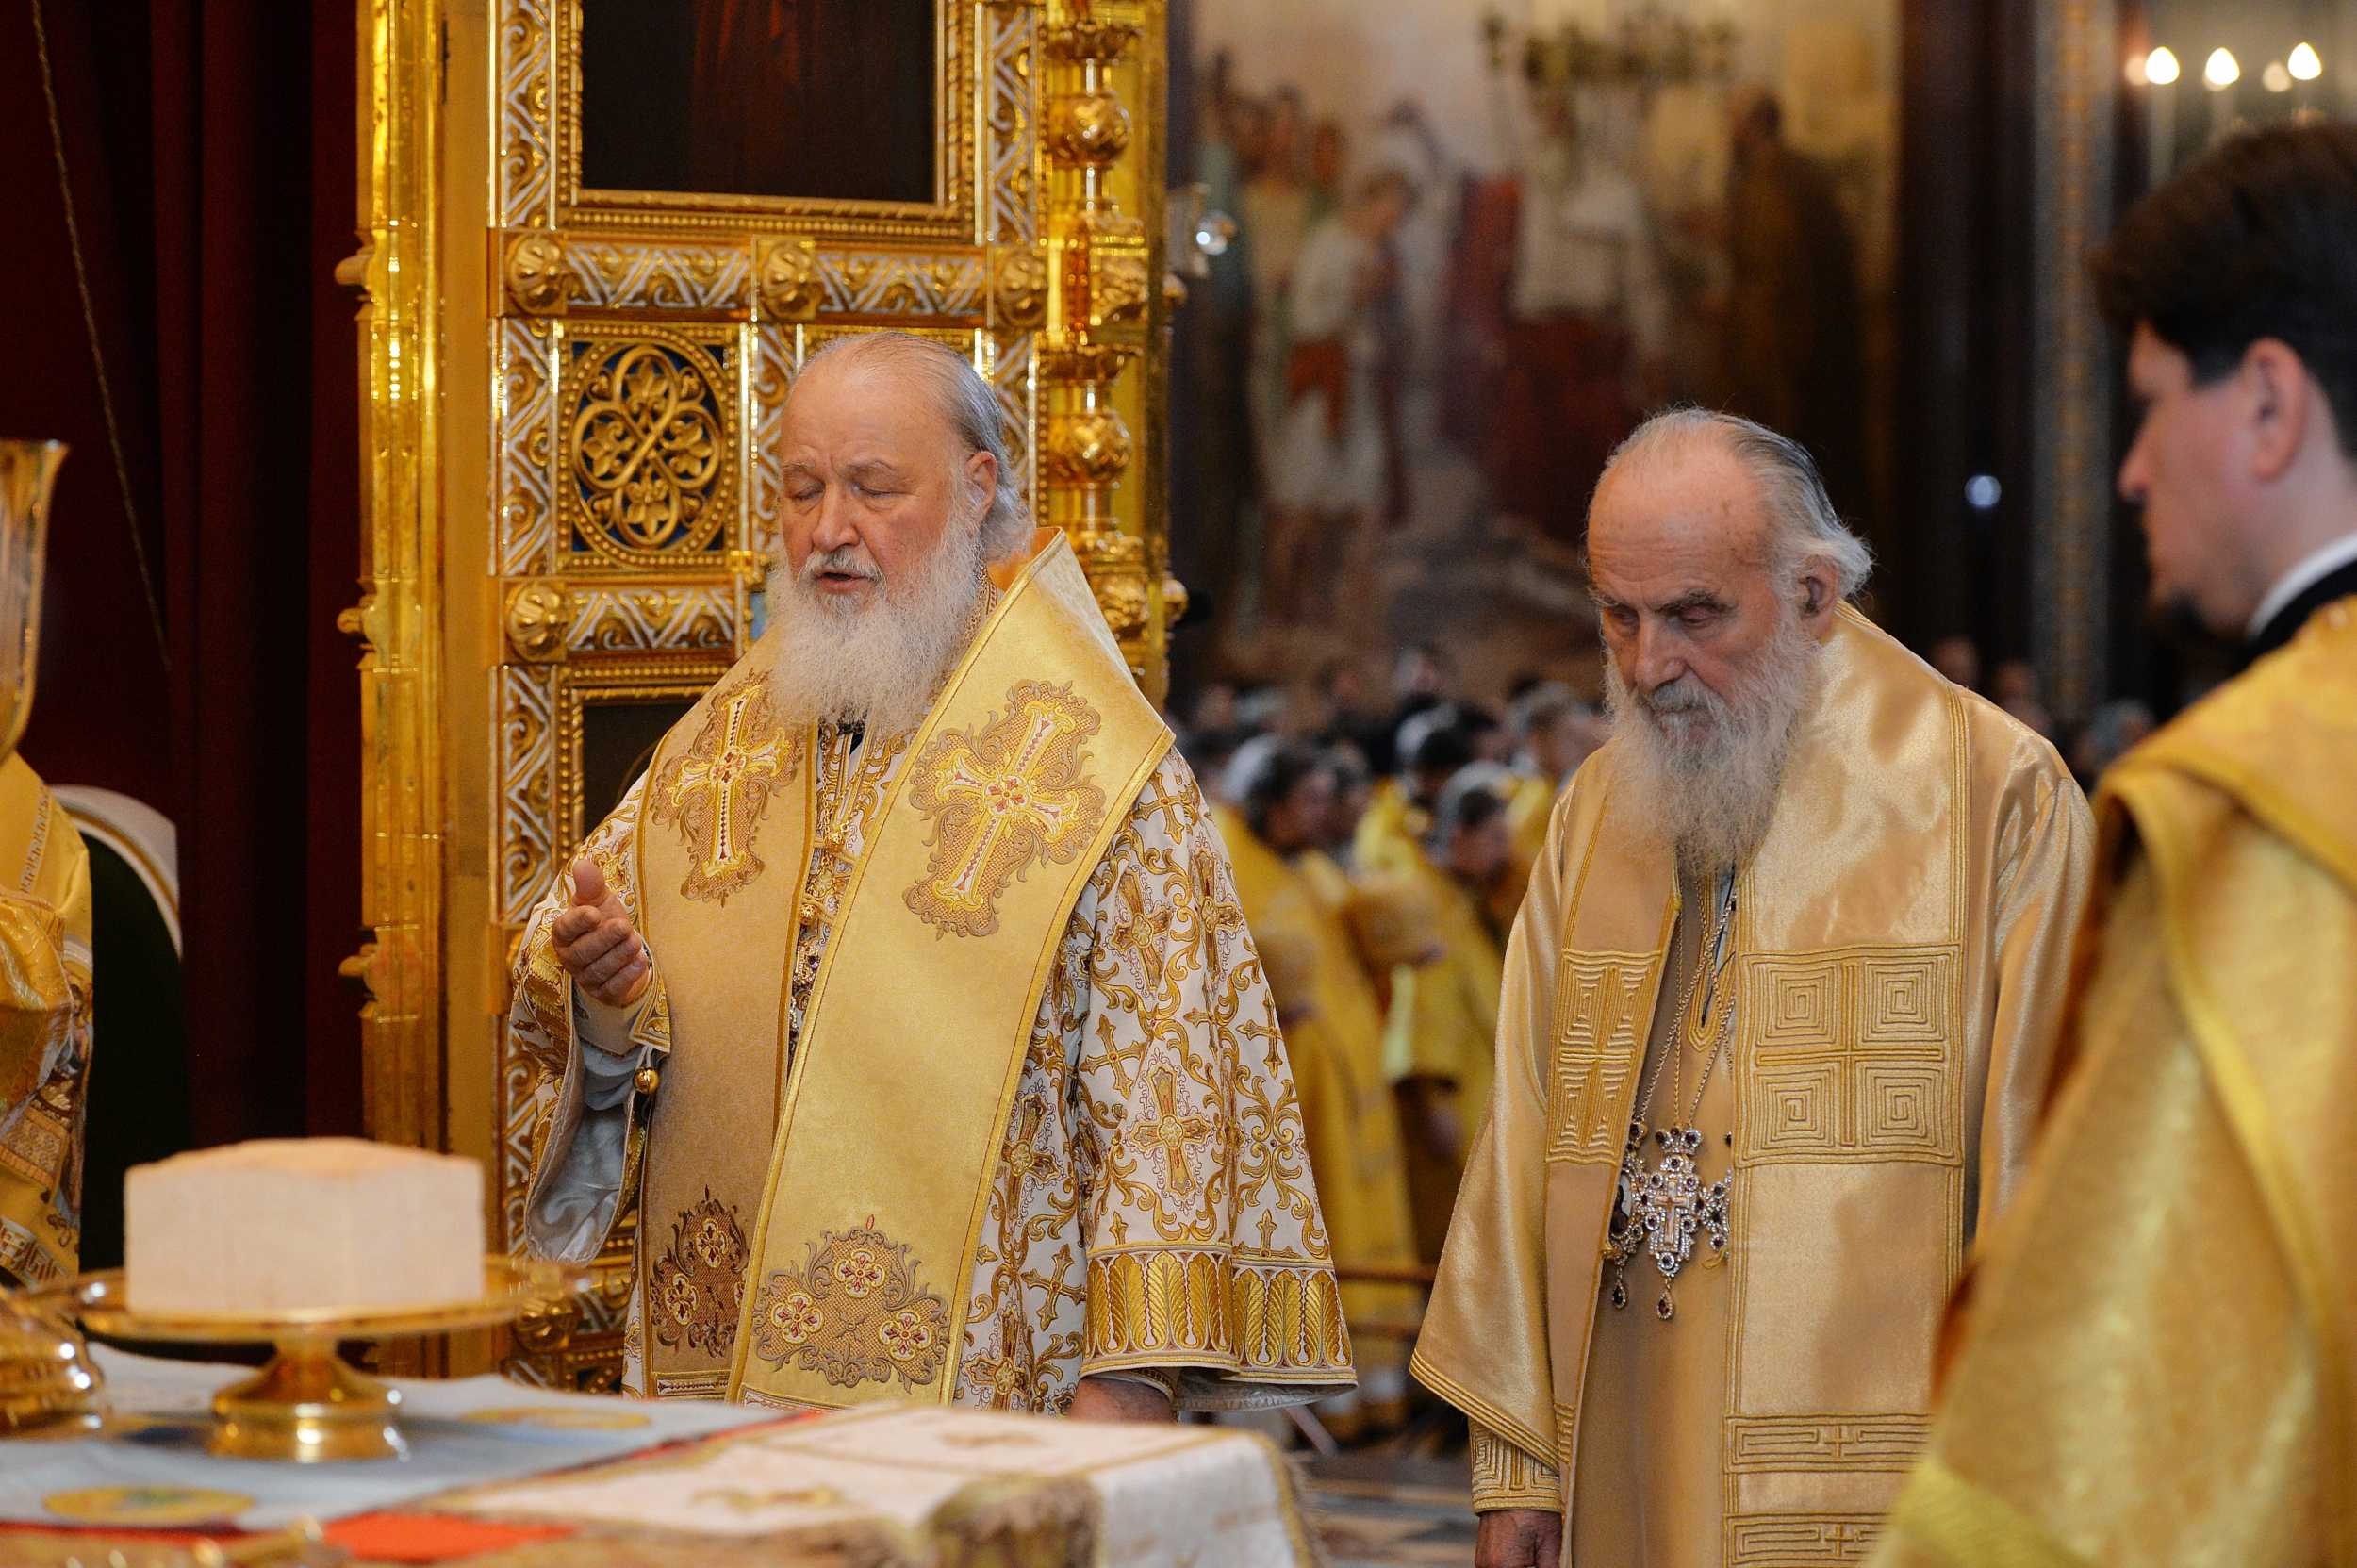 Concelebration between Russian and Serbian Patriarchs